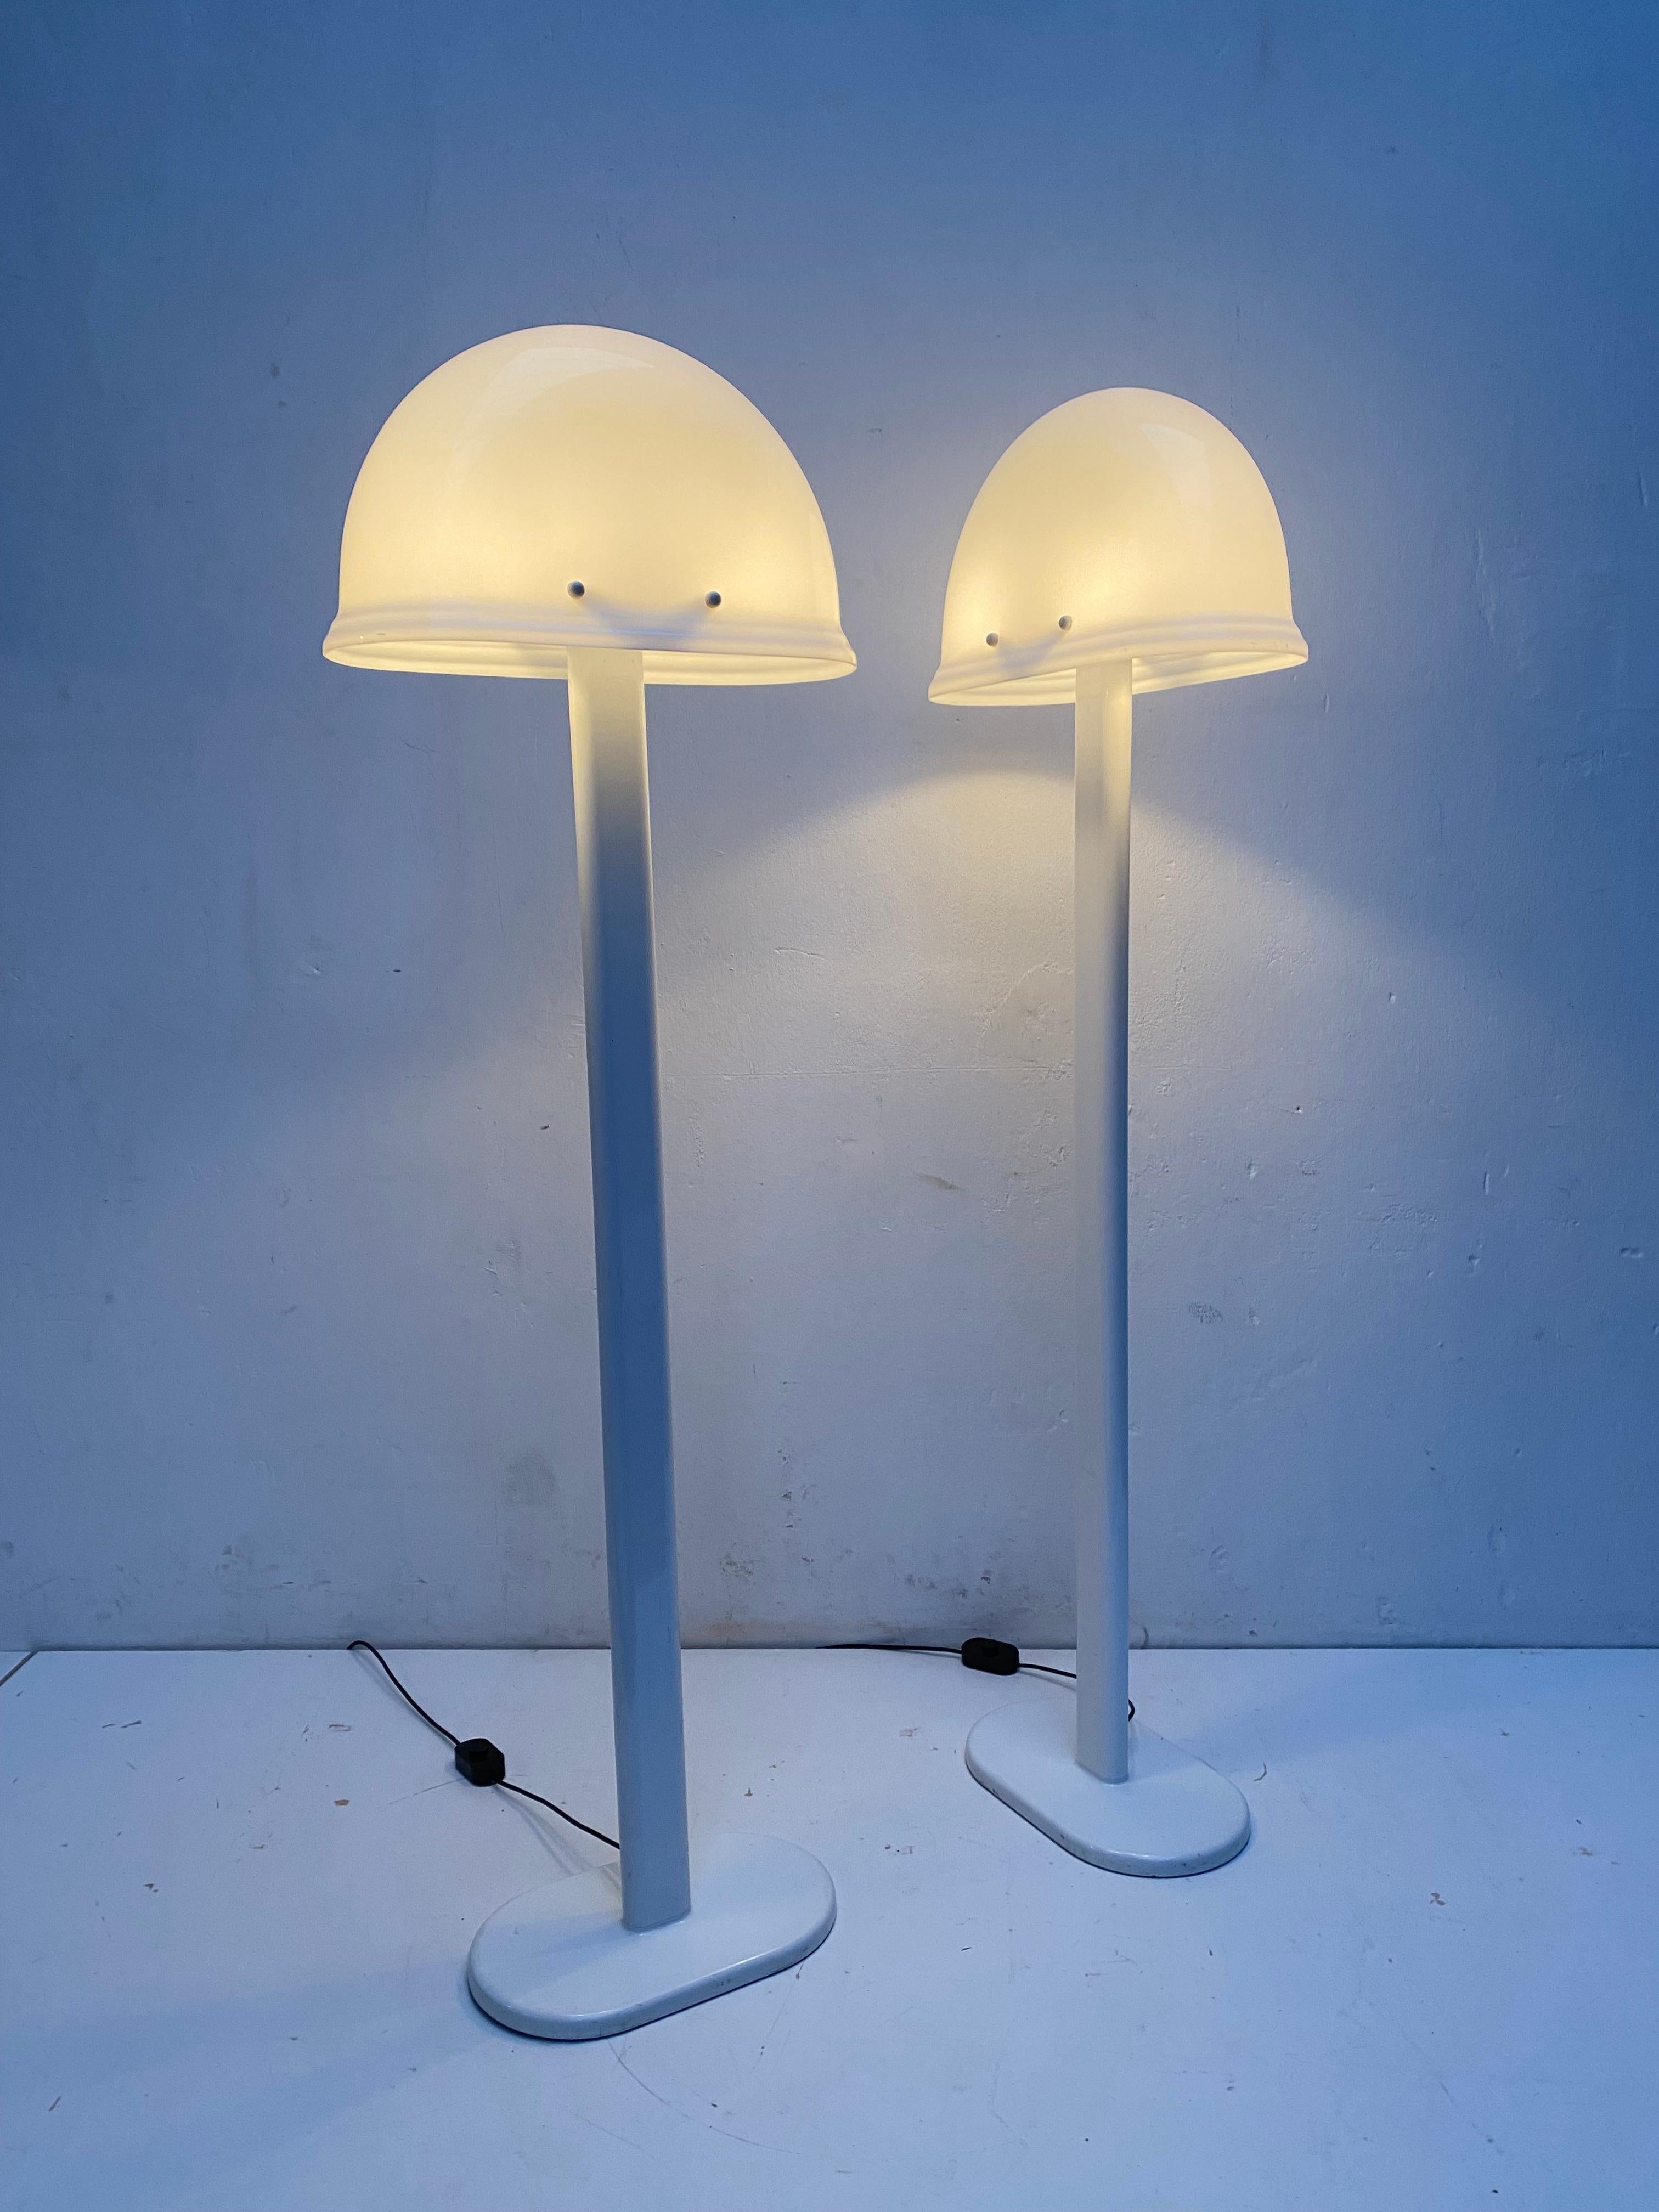 Enameled Rare Pair of White Rodolfo Bonetto Space Age Floor Lamps for iGuzzini Italy 1970 For Sale